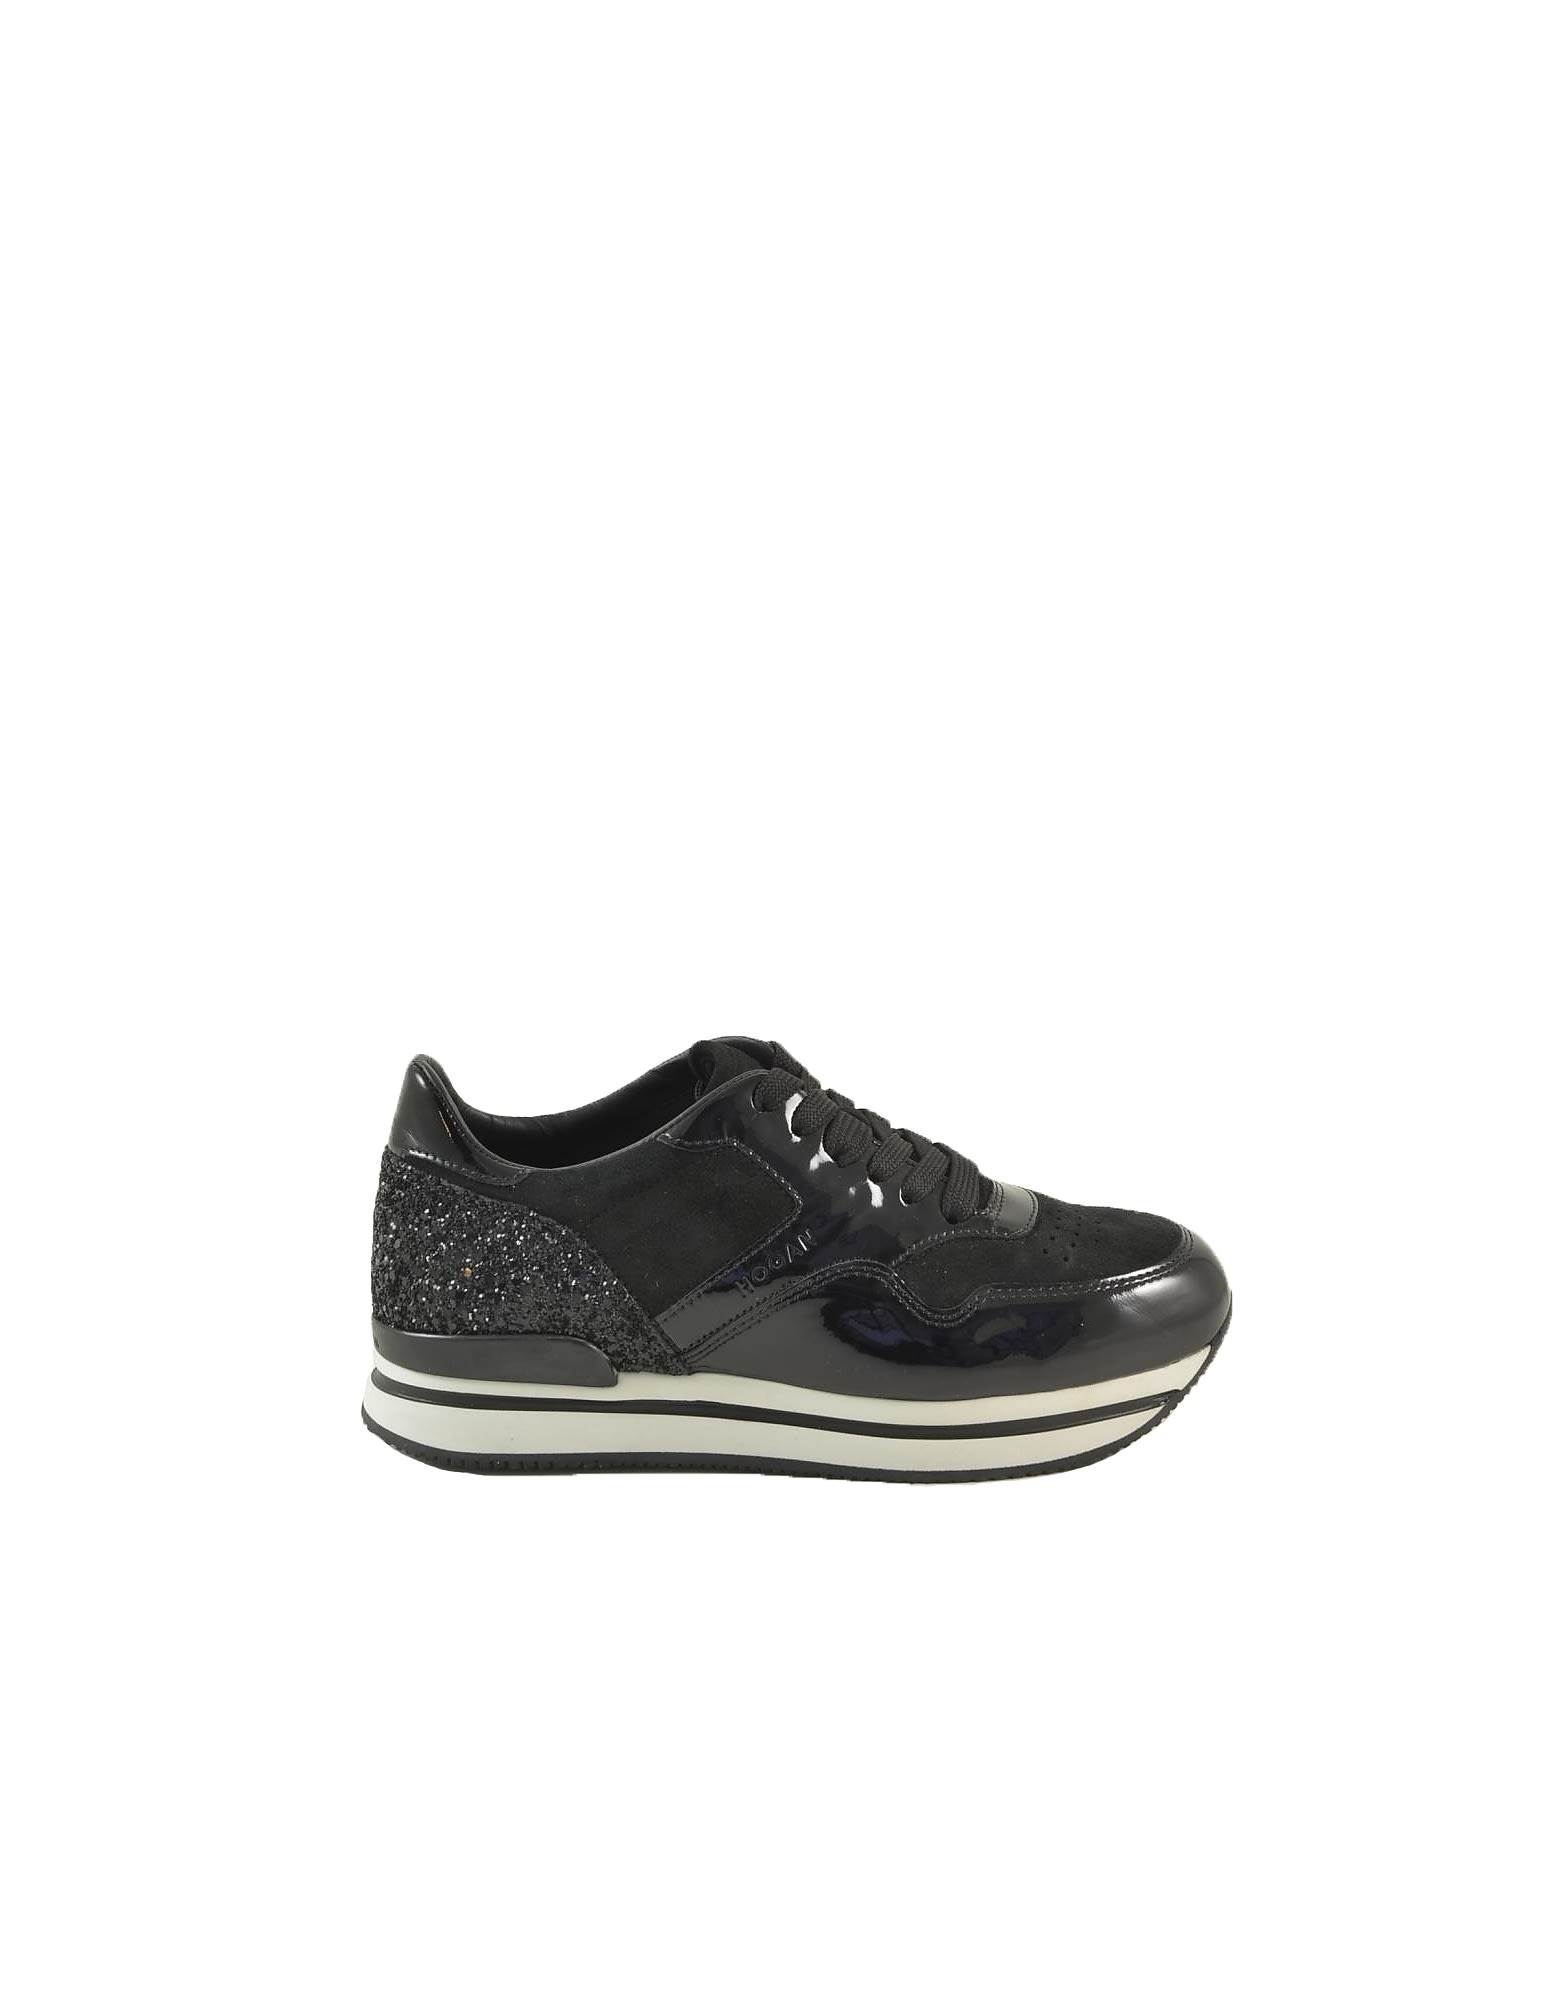 Hogan Black Leather Suede And Glitter Womens Sneakers